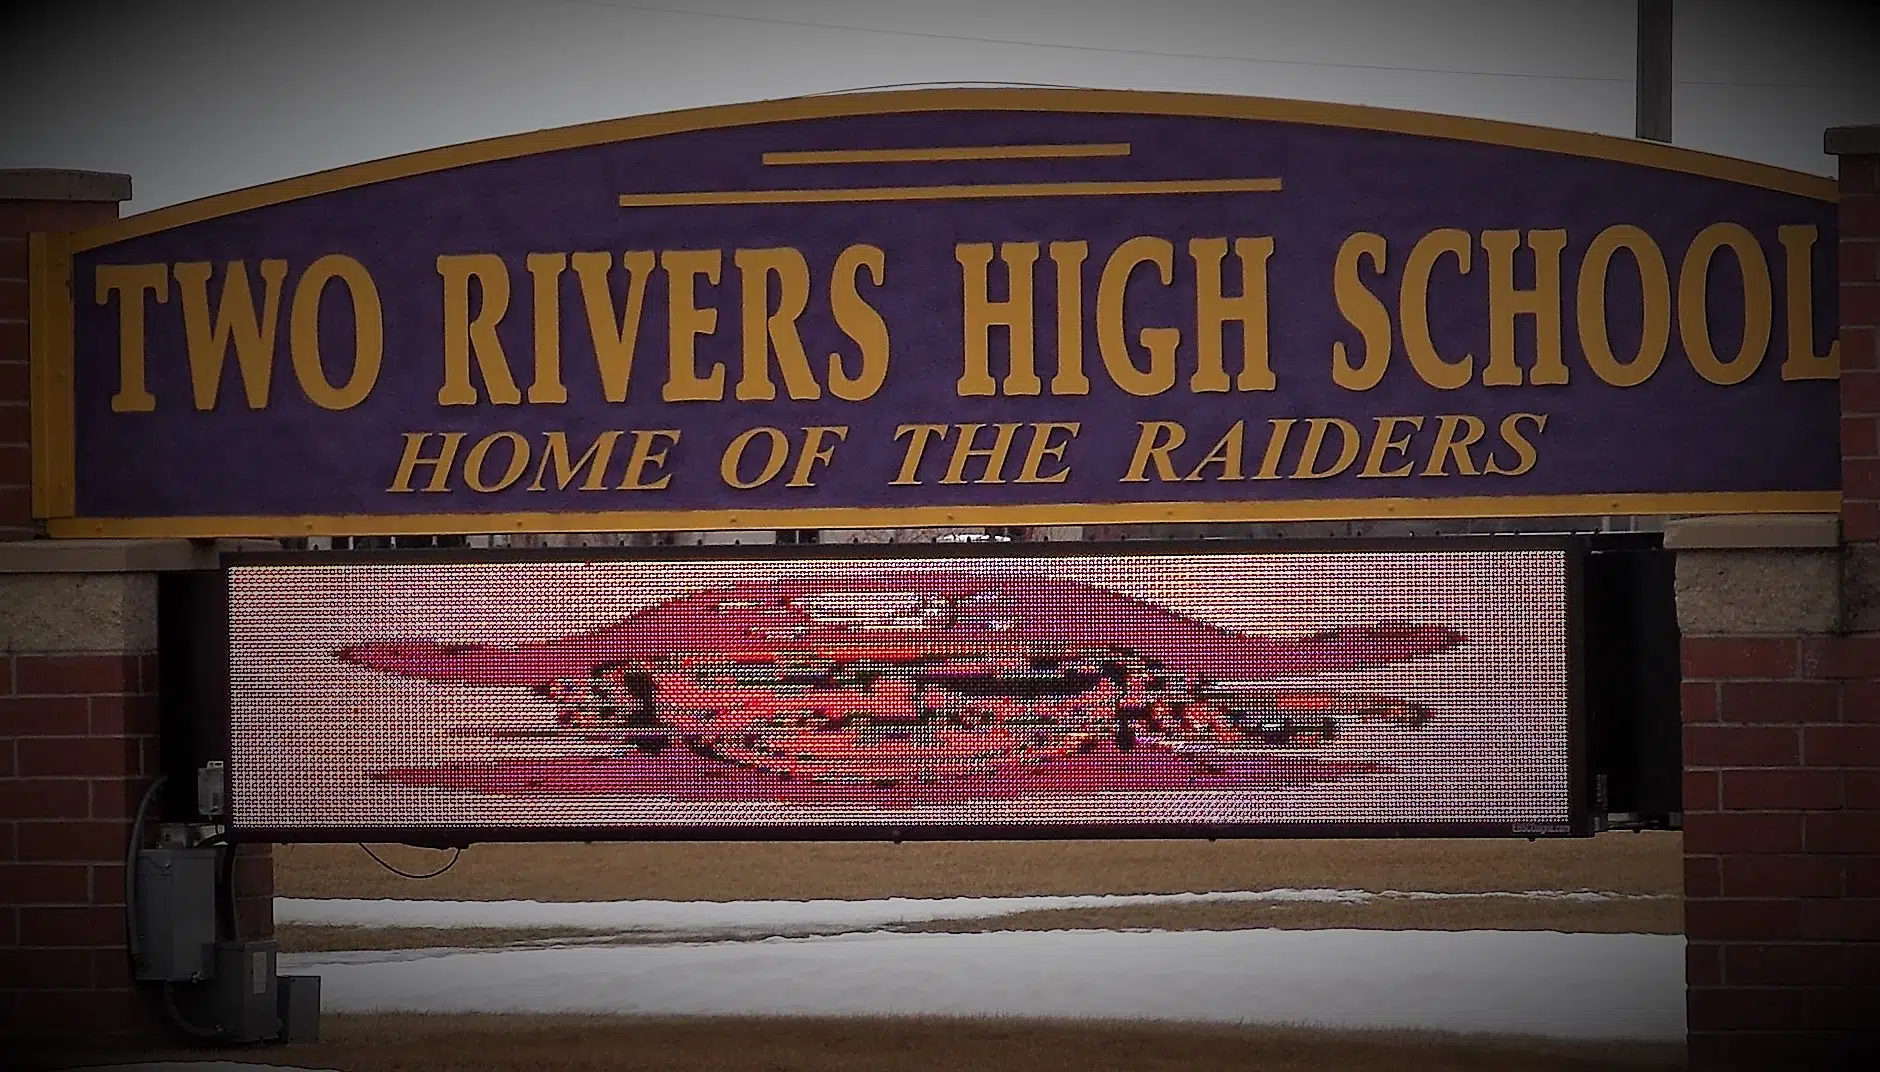 Kewaunee Storms past Two Rivers